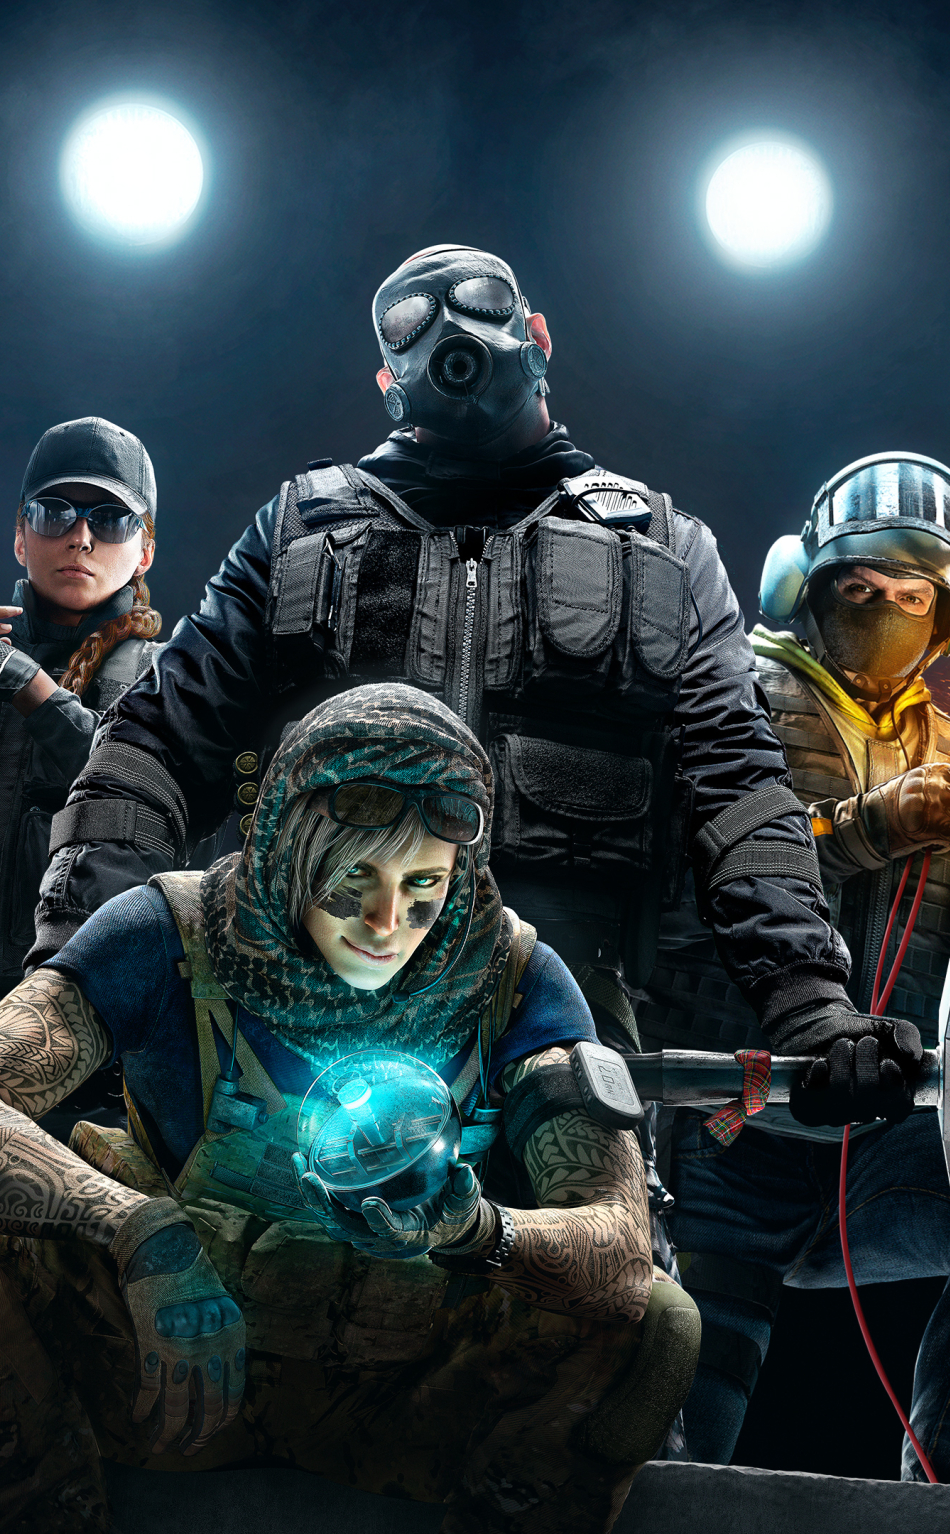 Android Rainbow Six Siege Wallpapers